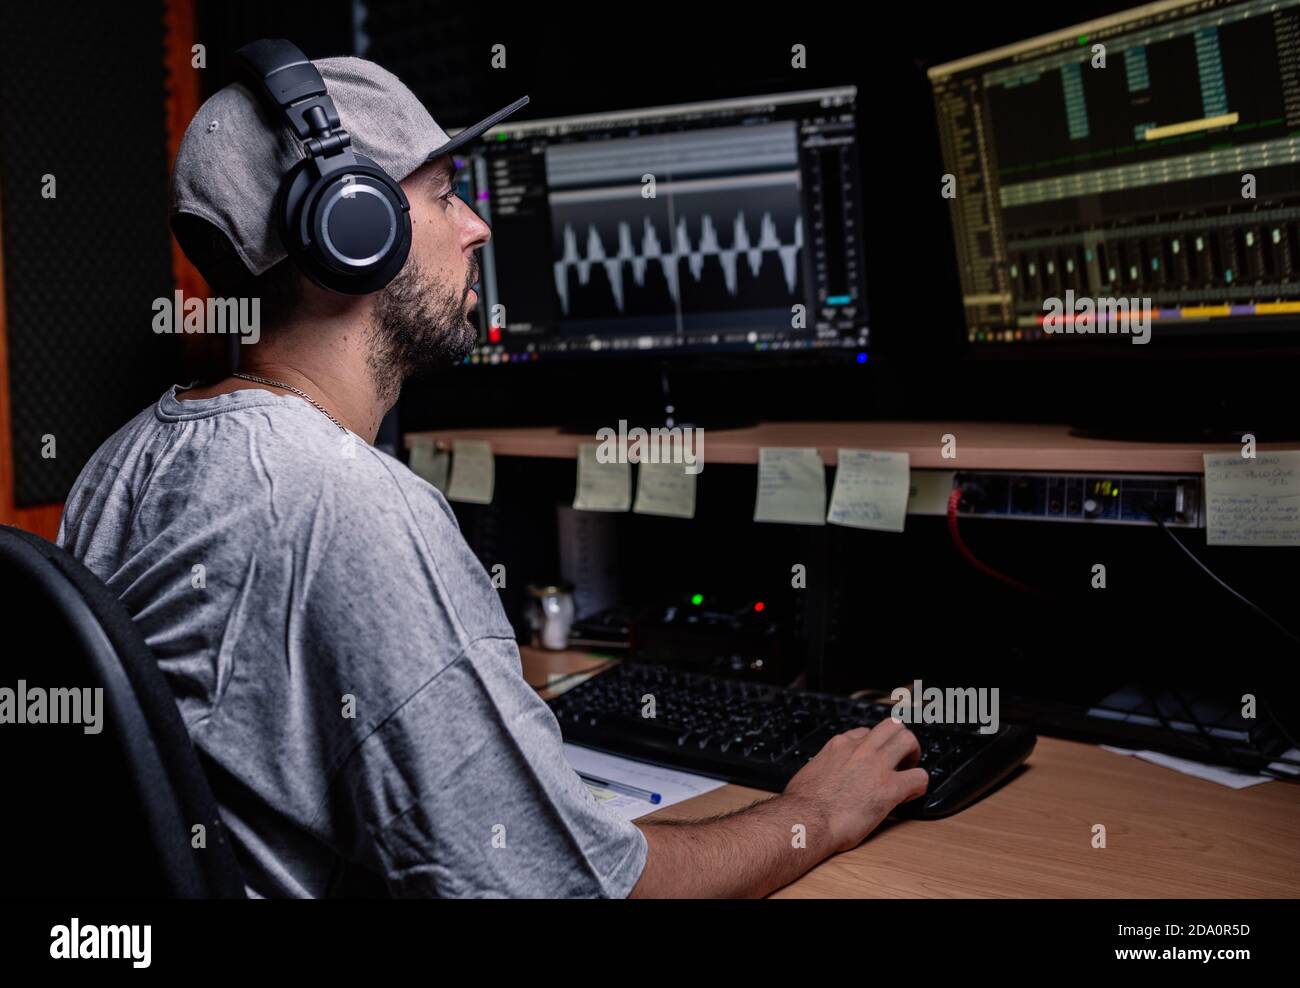 Side view of male musician sitting at table with monitors and stereo speakers while recording audio in studio Stock Photo